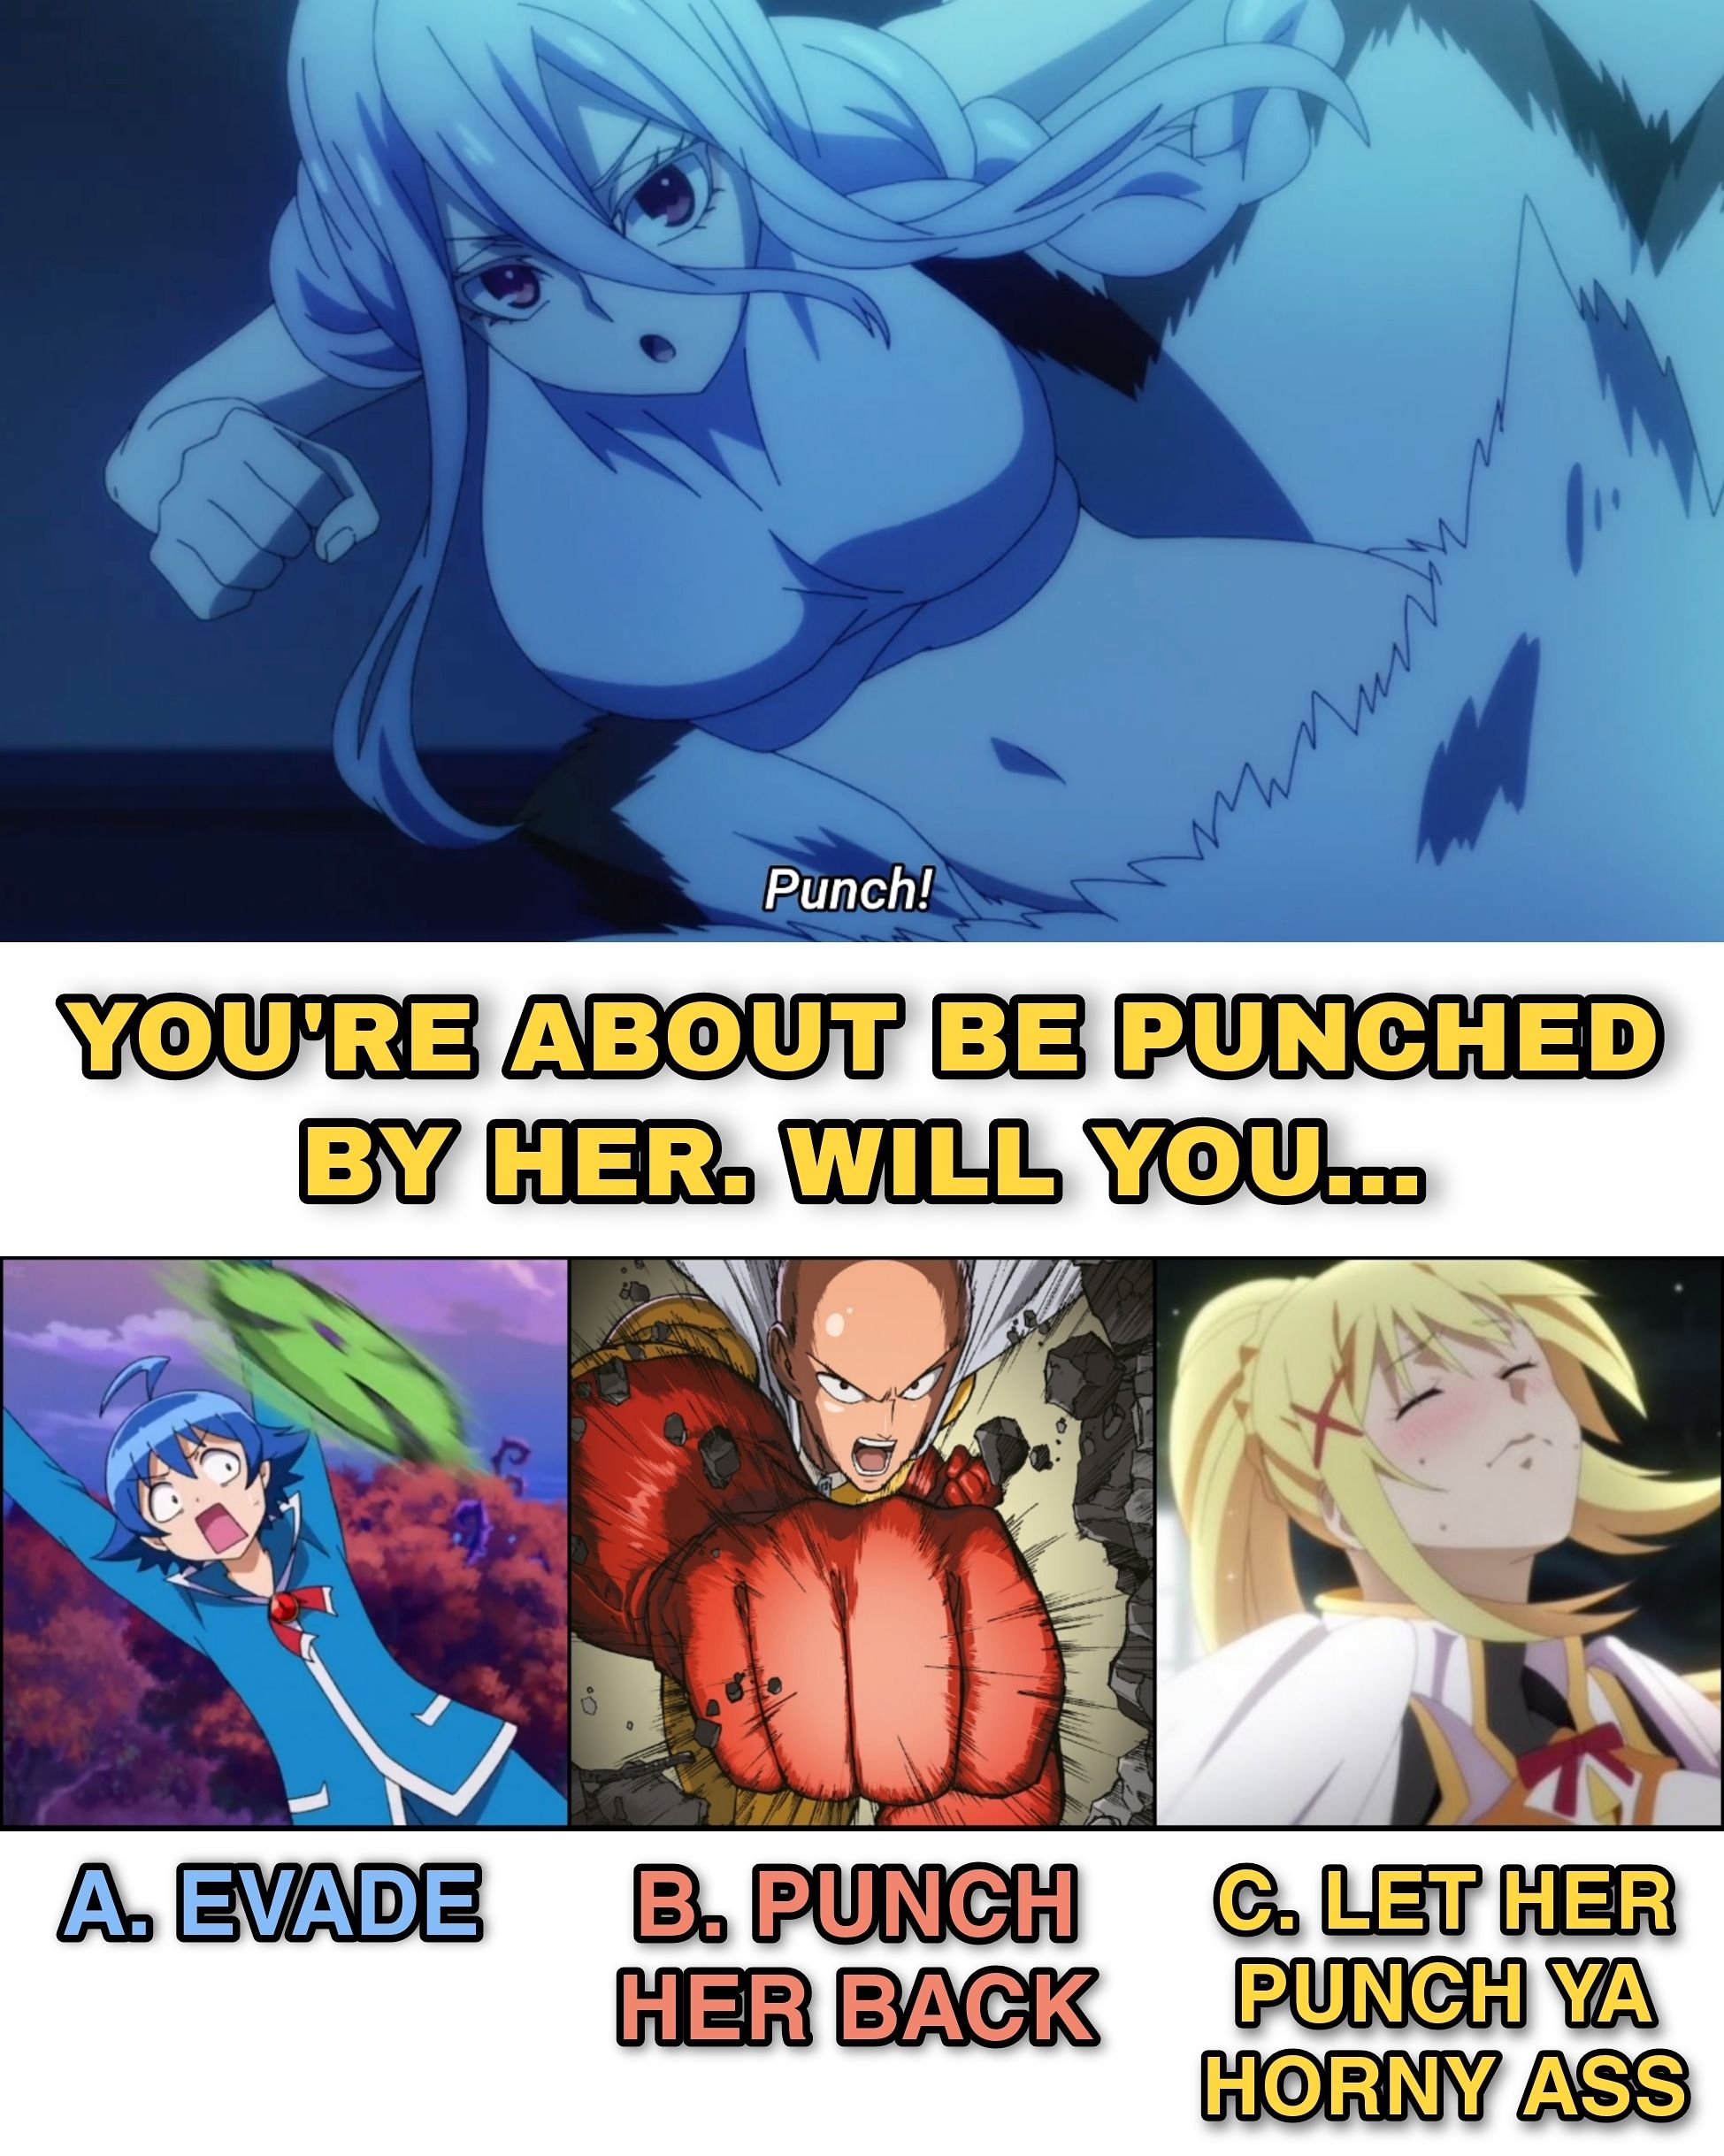 Just to remind that her punch is very lethal